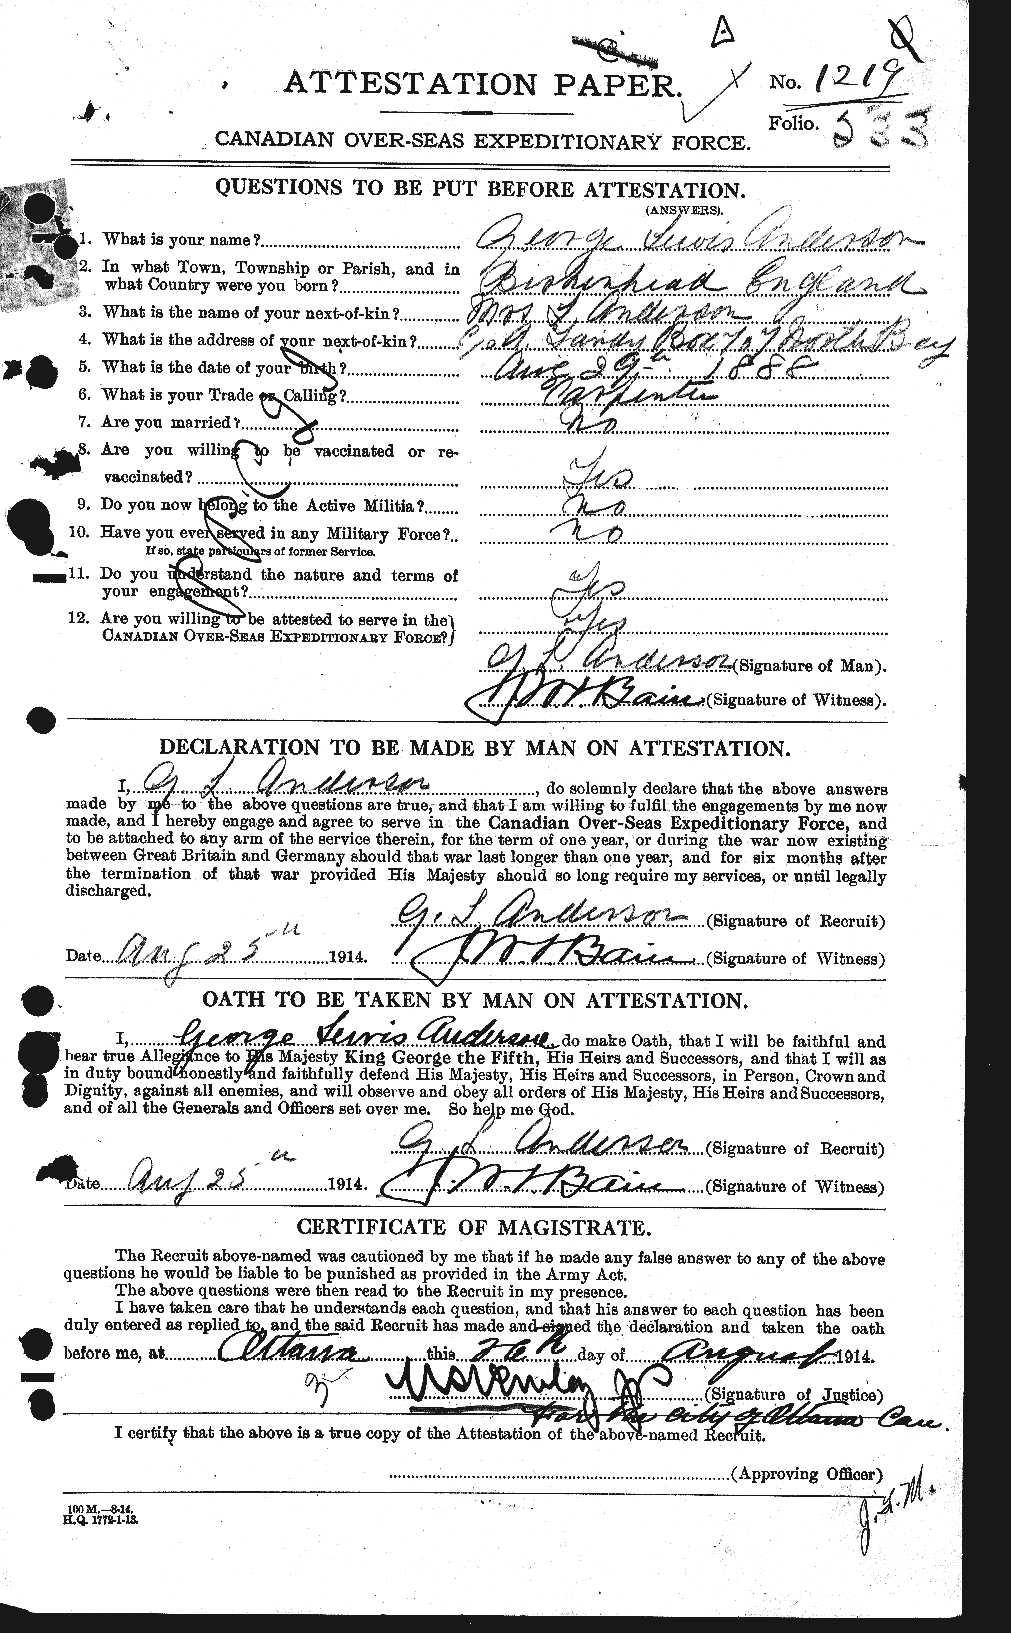 Personnel Records of the First World War - CEF 209713a